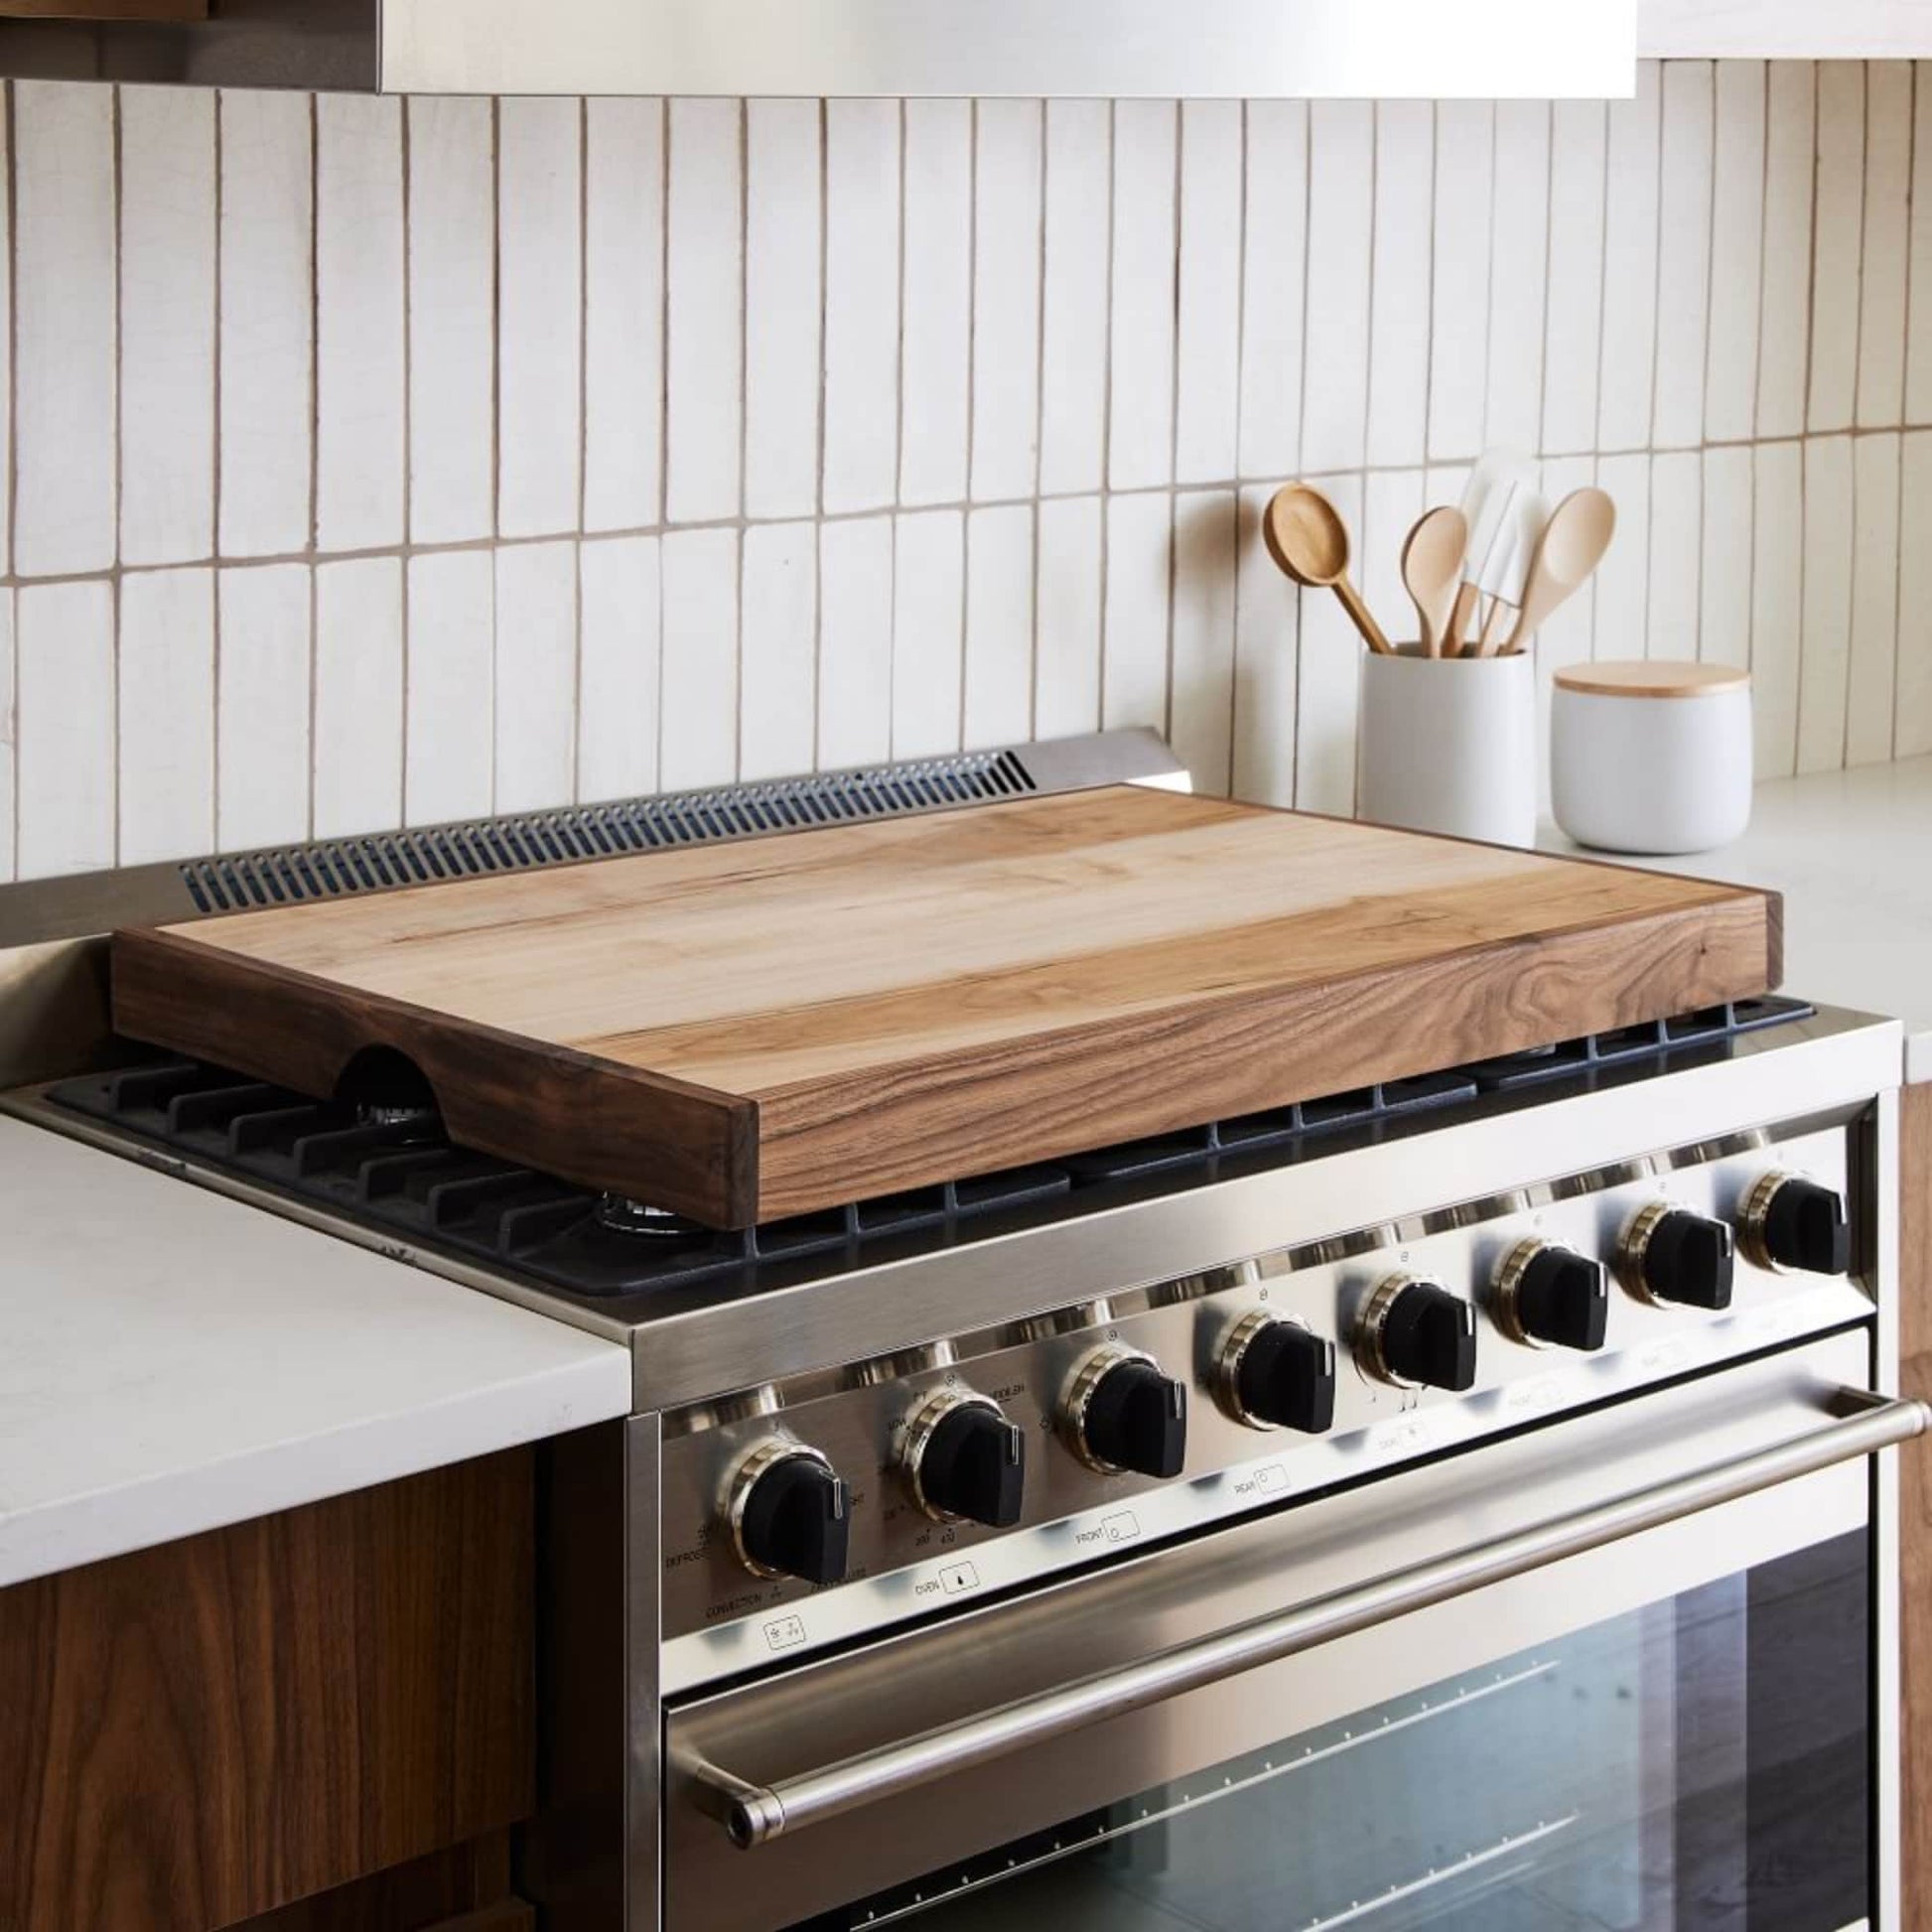 Ashland Stove Top Cover| Wood Handmade  Noodle Board | Cutting Board Cooktop Burner Cover